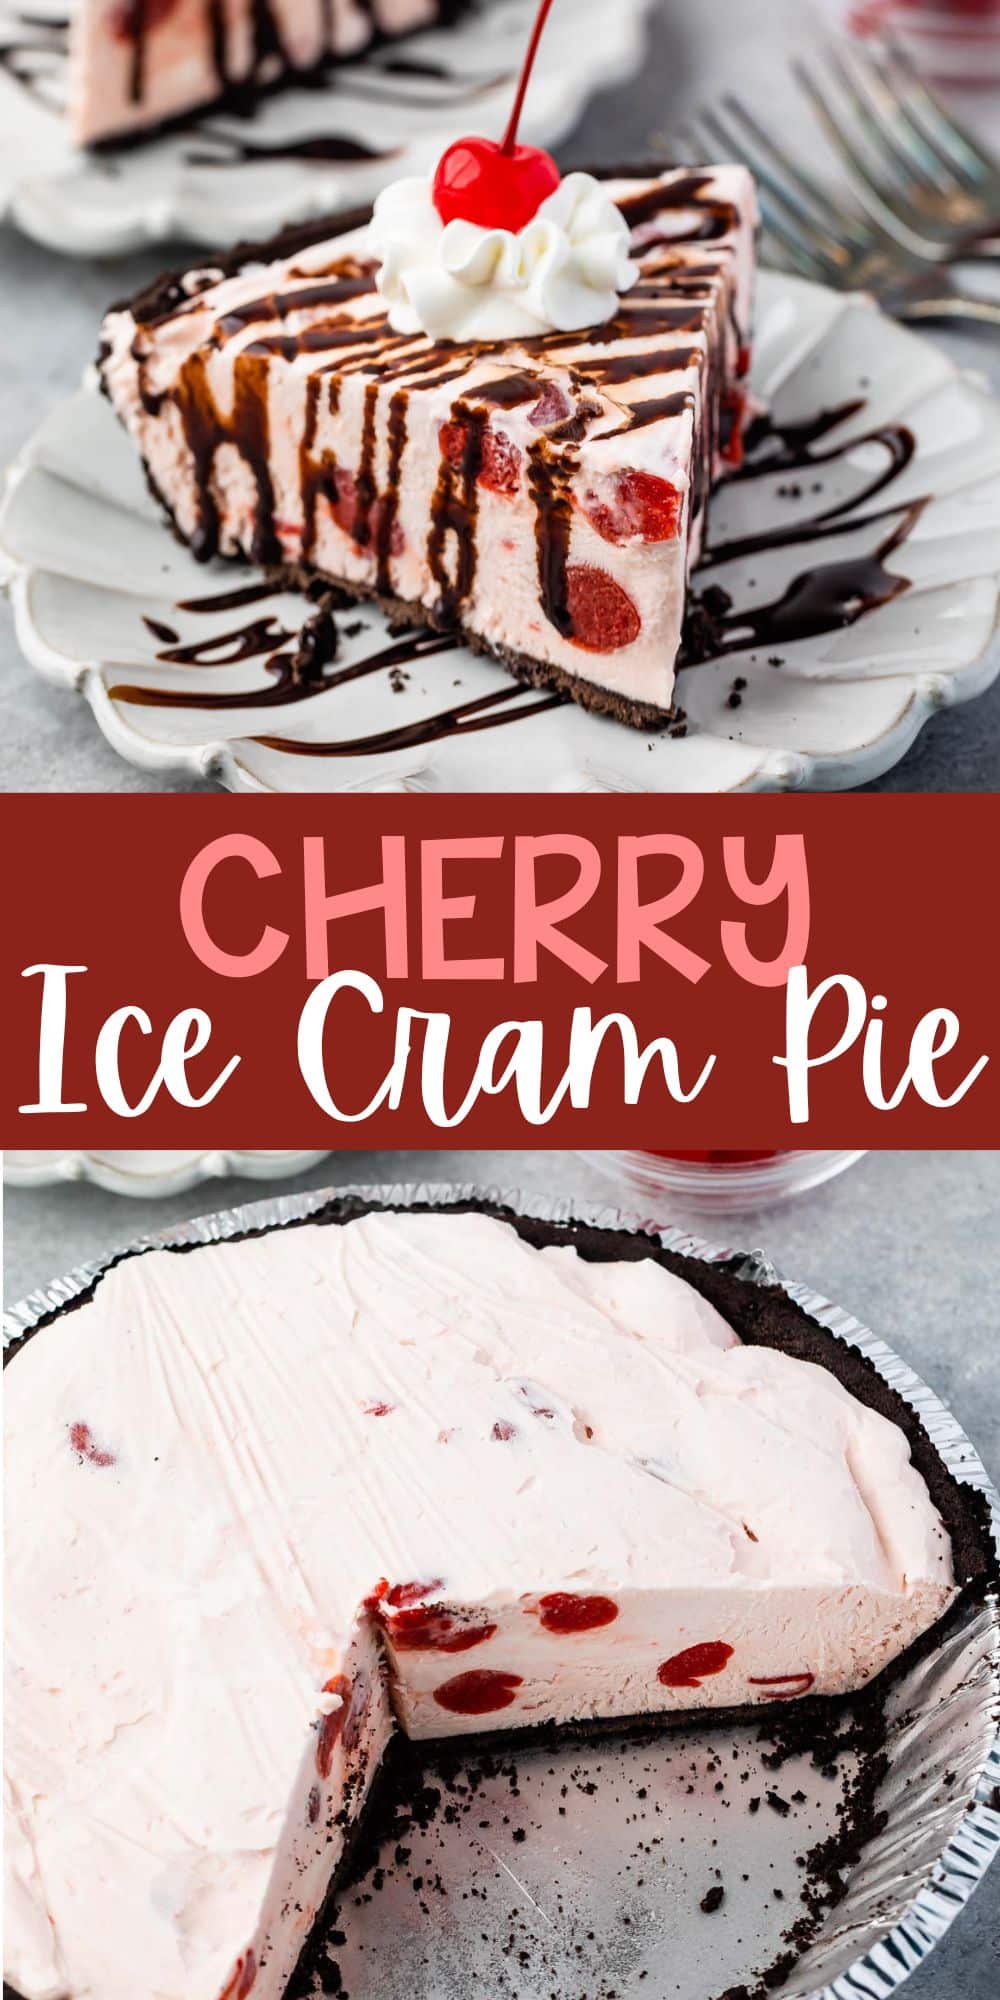 two photos of pink slice of pie covered in chocolate sauce, whipped cream and a cherry with words on the image.